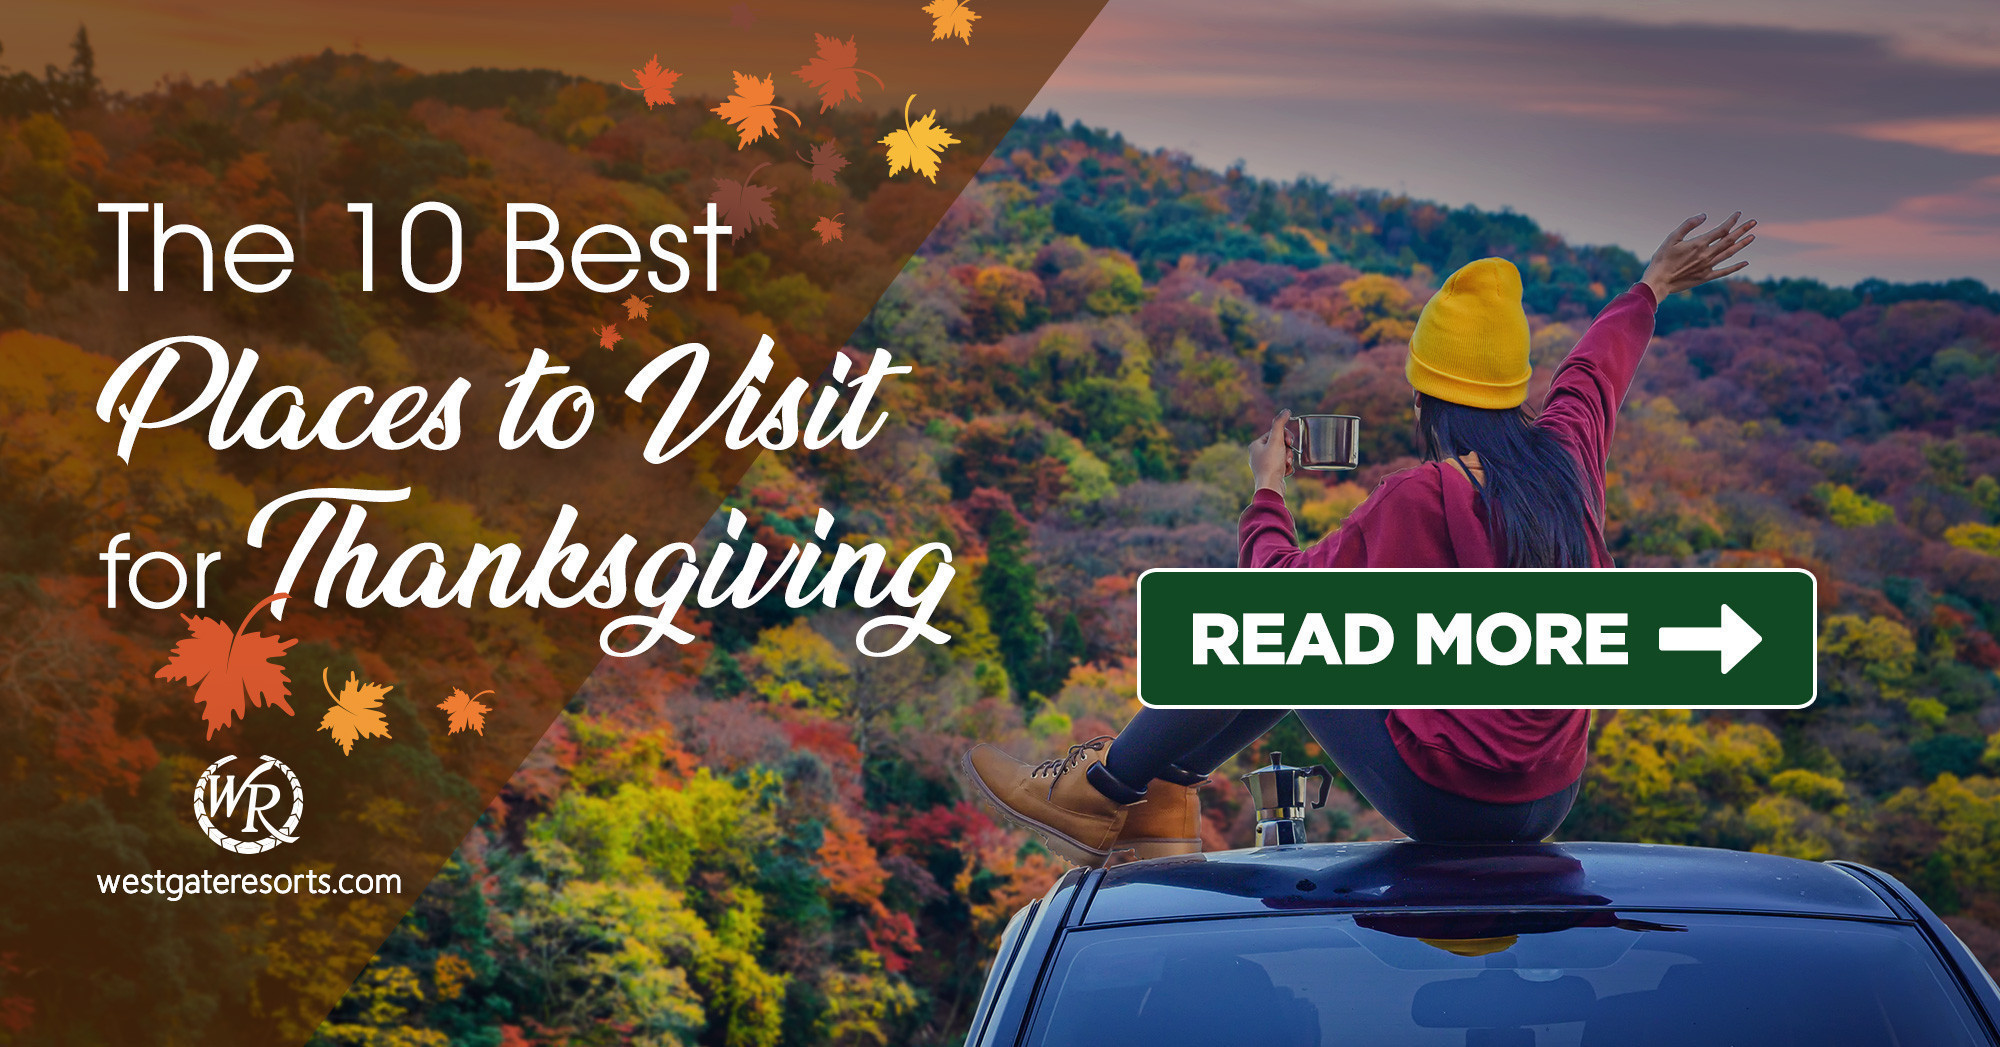 The 10 Best Places to Visit for Thanksgiving